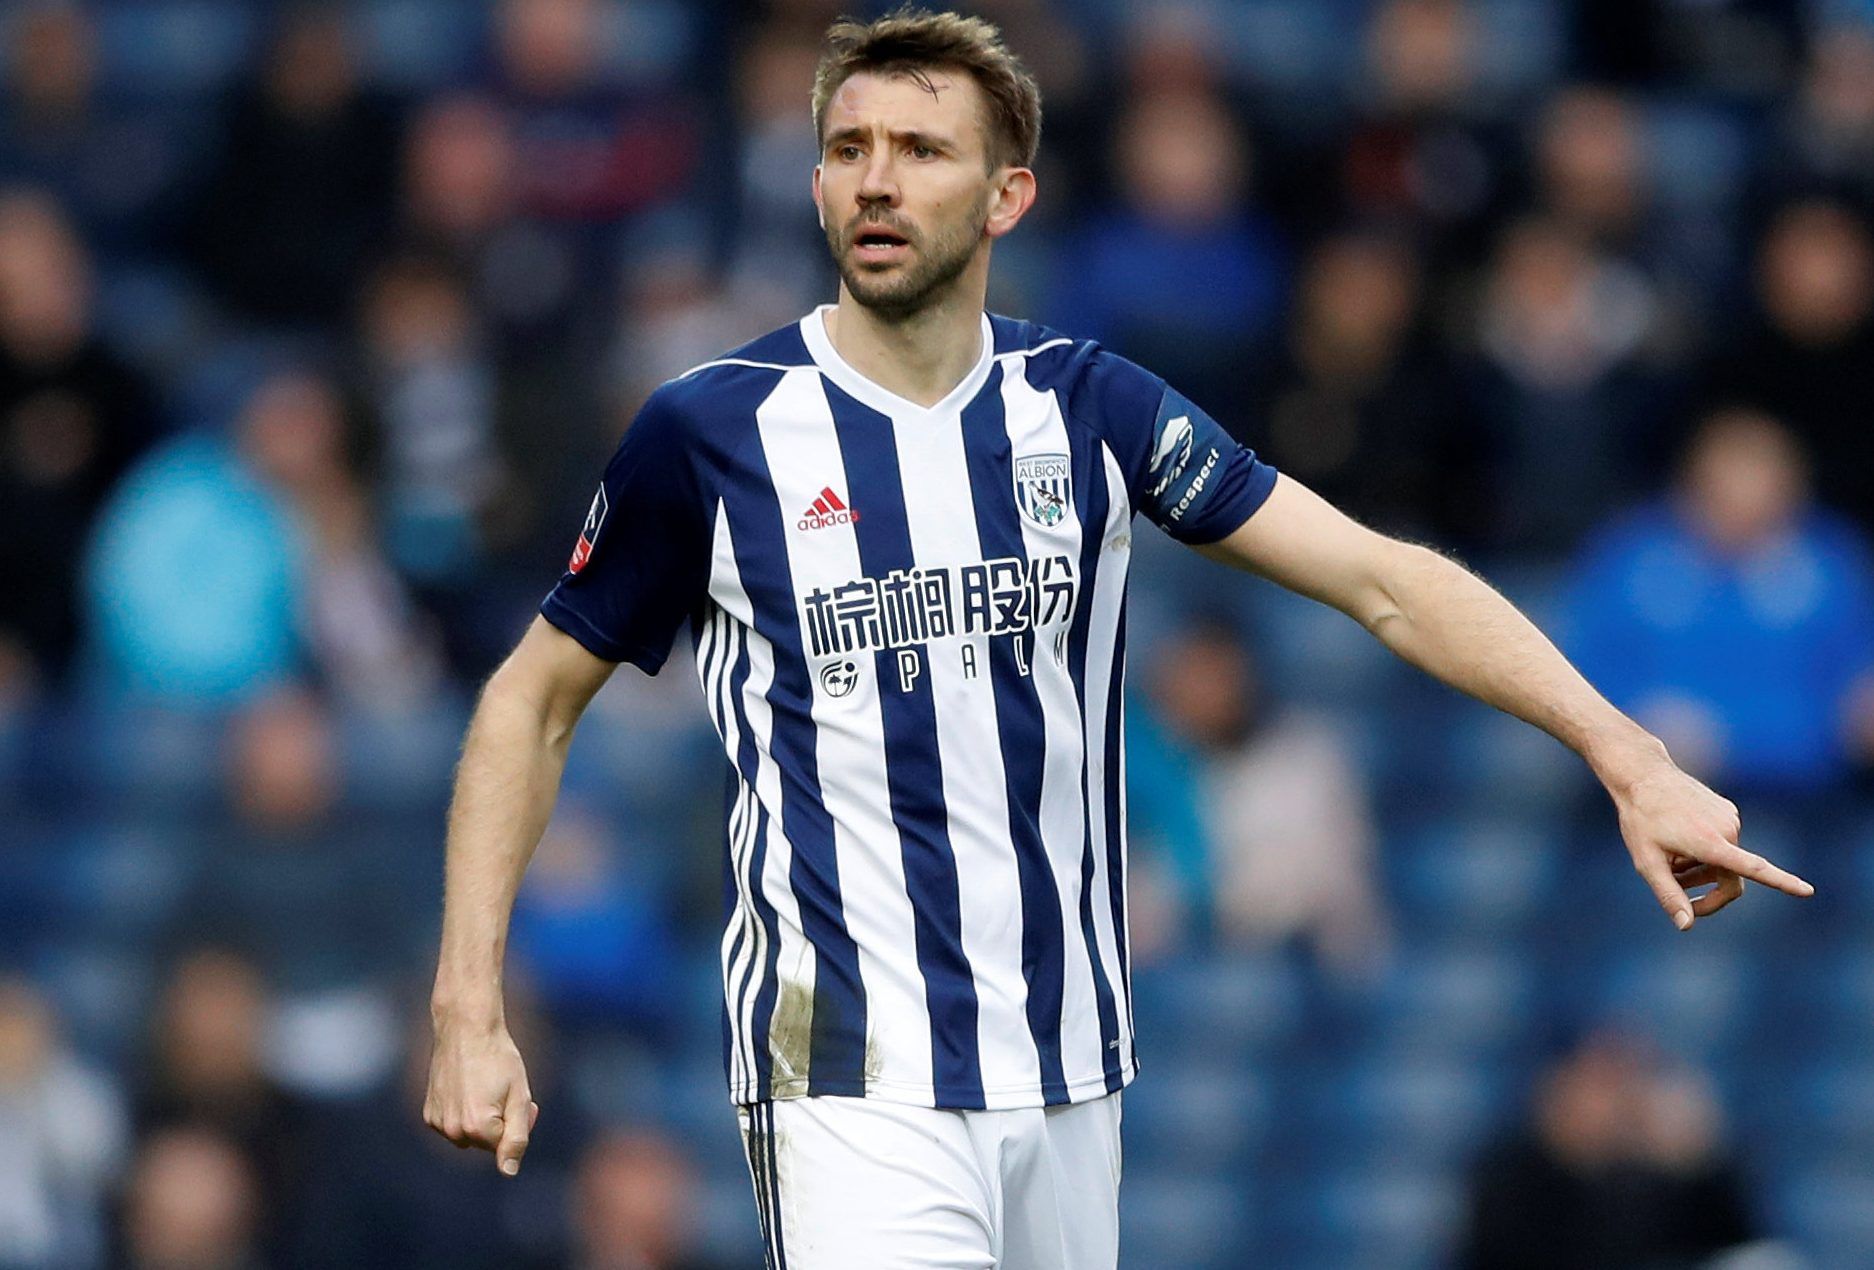 Soccer Football - FA Cup Fifth Round - West Bromwich Albion vs Southampton - The Hawthorns, West Bromwich, Britain - February 17, 2018   West Bromwich Albion's Gareth McAuley    Action Images via Reuters/Carl Recine